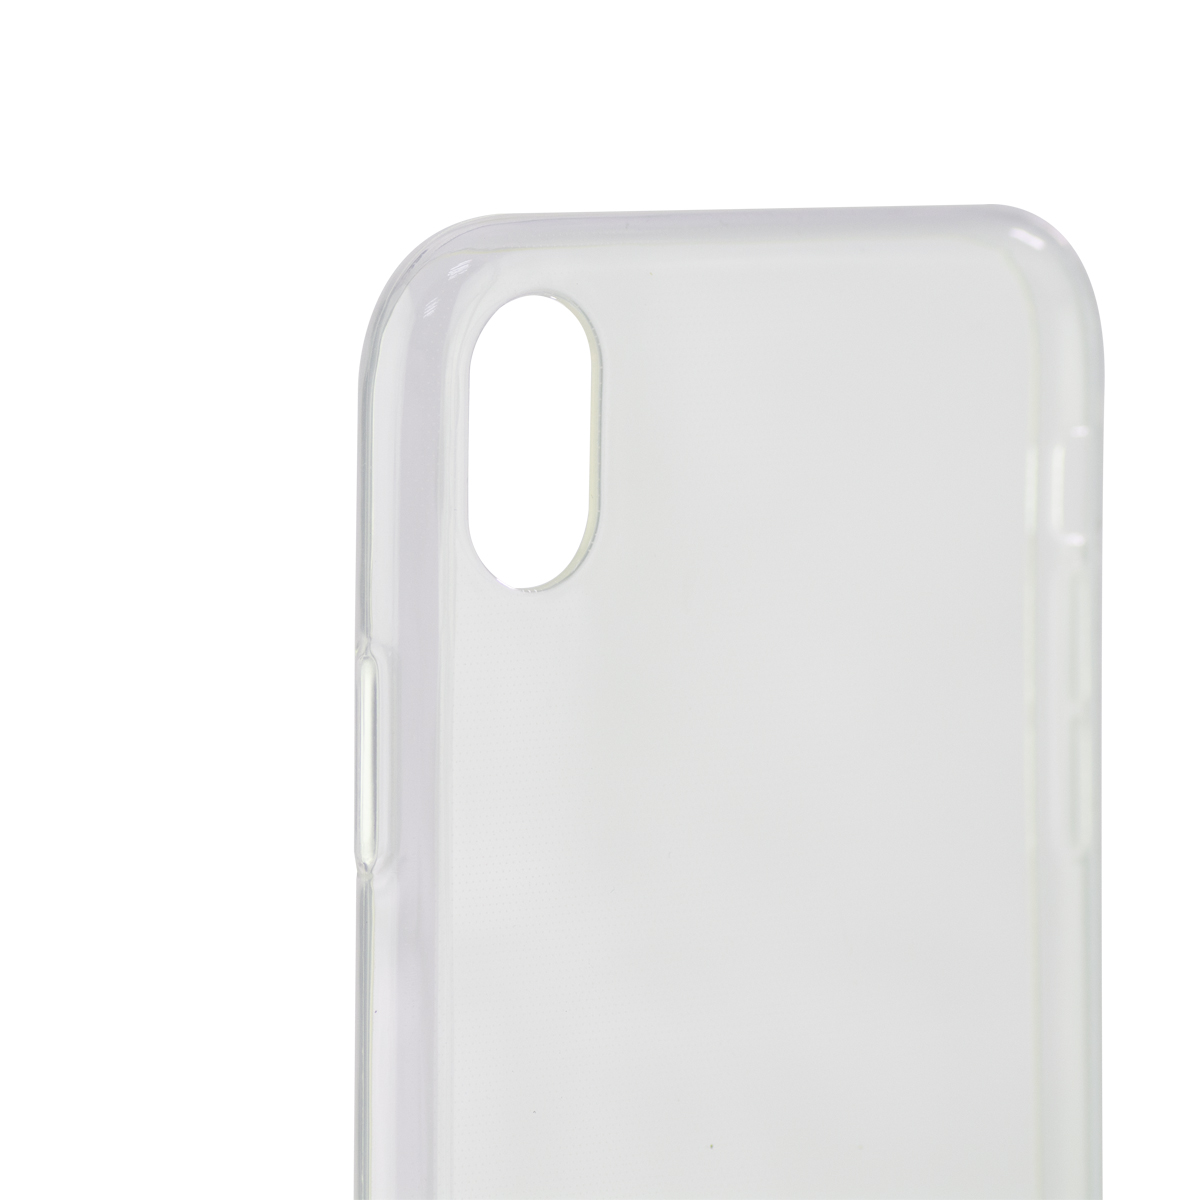 Handyhülle Max, Xs Full Apple, Max, KSIX Transparent Iphone Cover, Iphone Xs